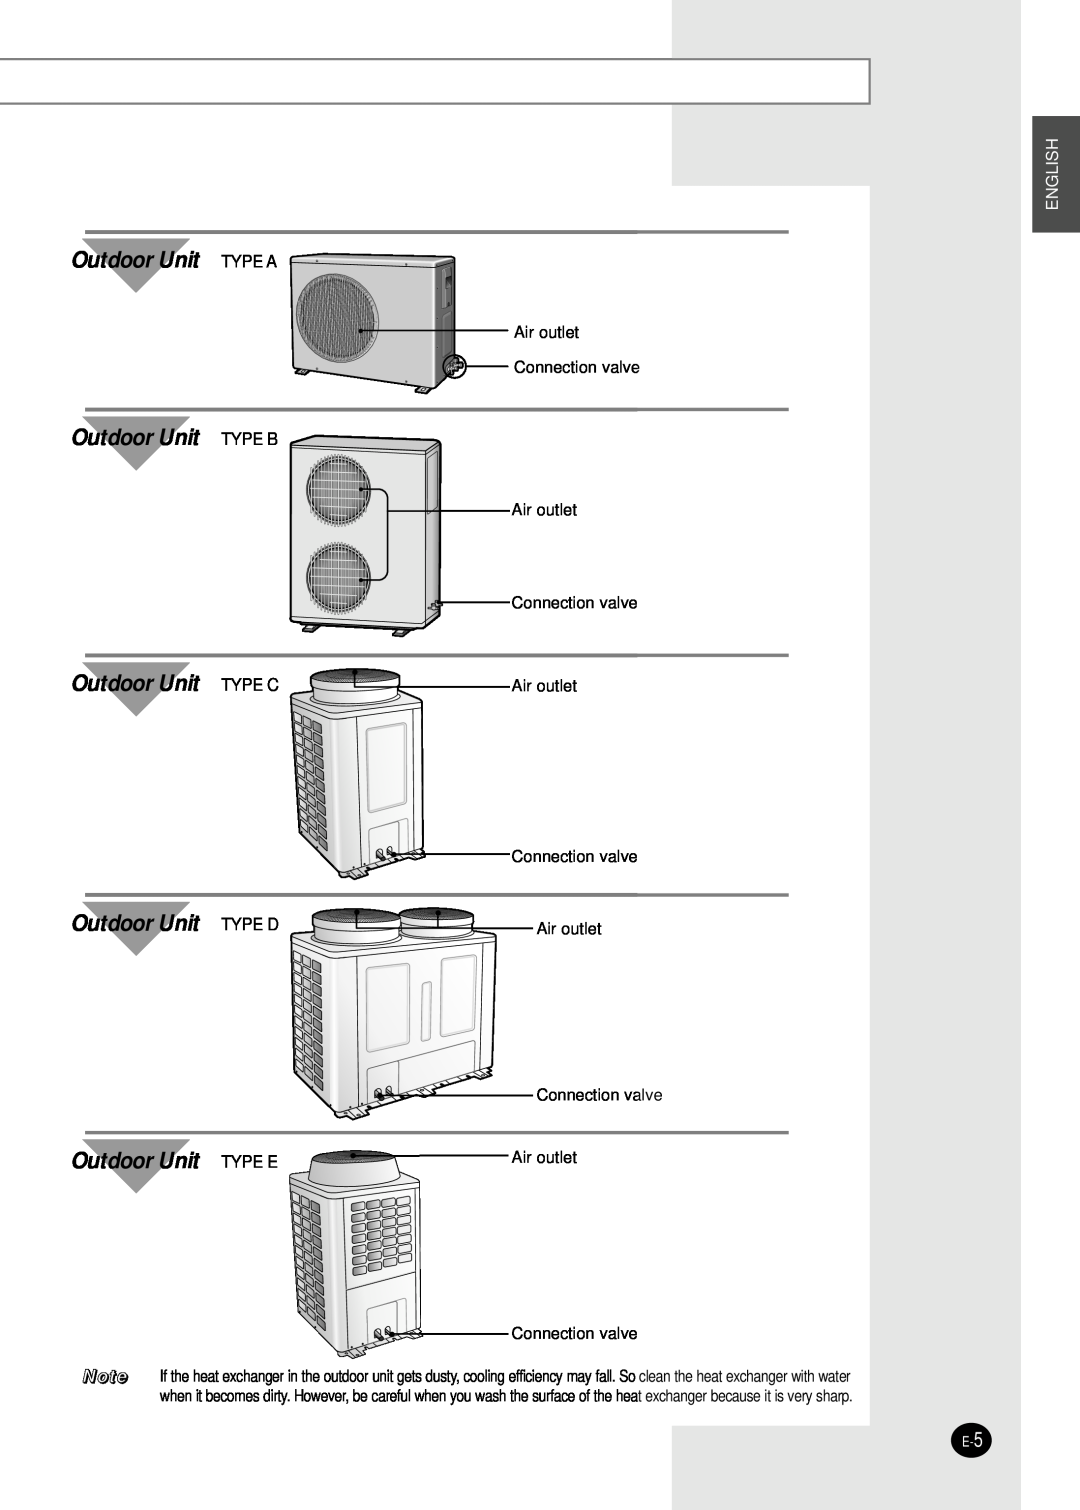 Samsung AVMHC105CA0 Outdoor Unit TYPE A, Outdoor Unit TYPE B, Outdoor Unit TYPE D, Outdoor Unit TYPE E, English 